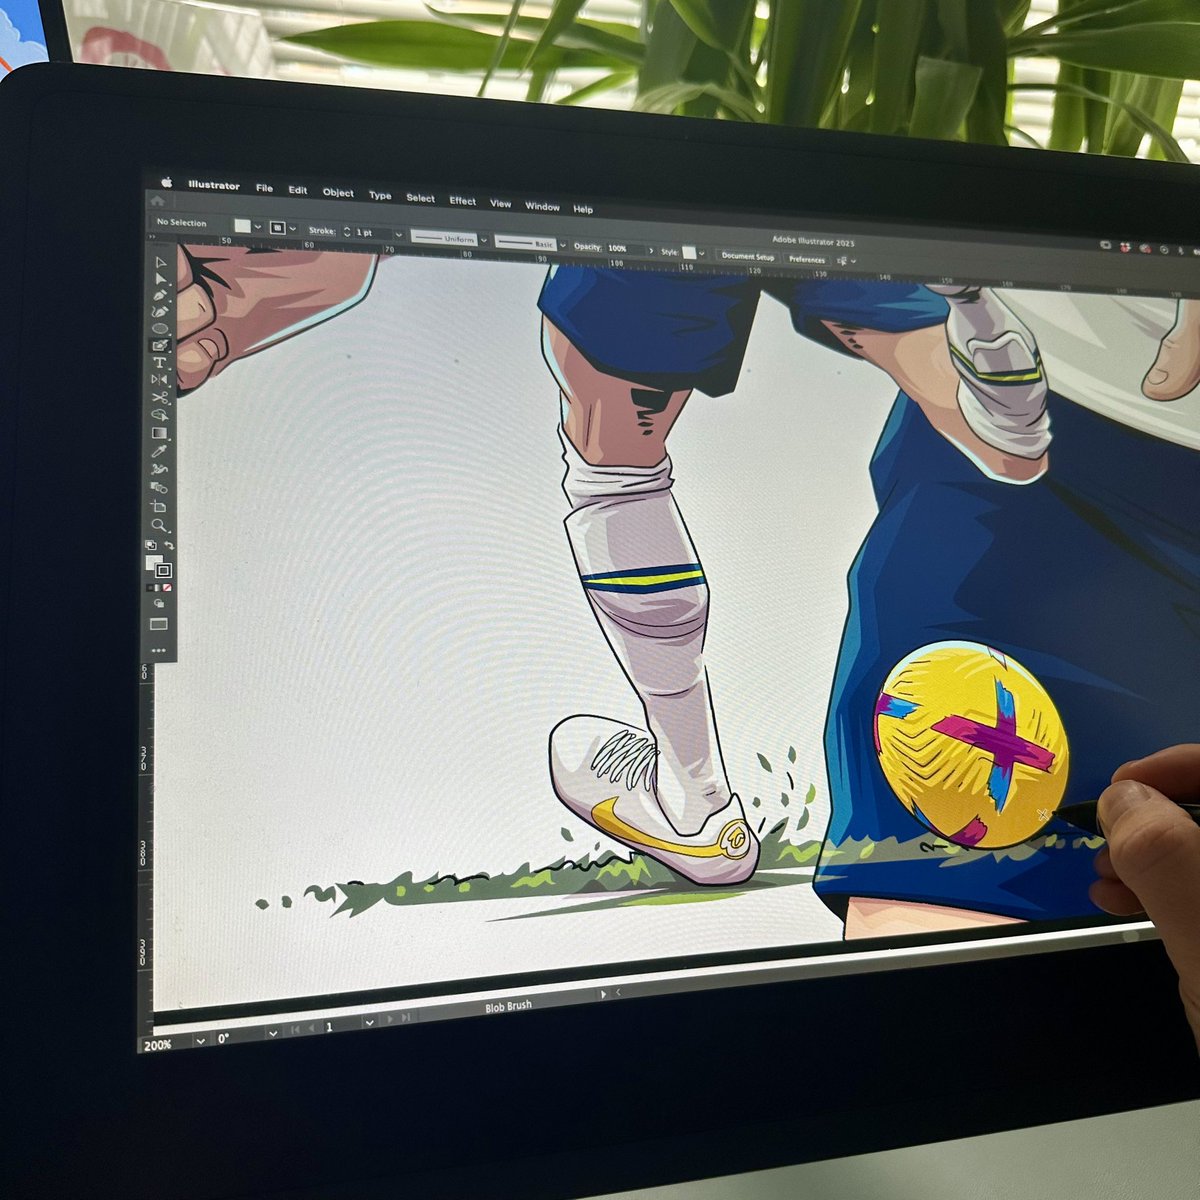 A little behind the scenes teaser of a project I’m working on 👀